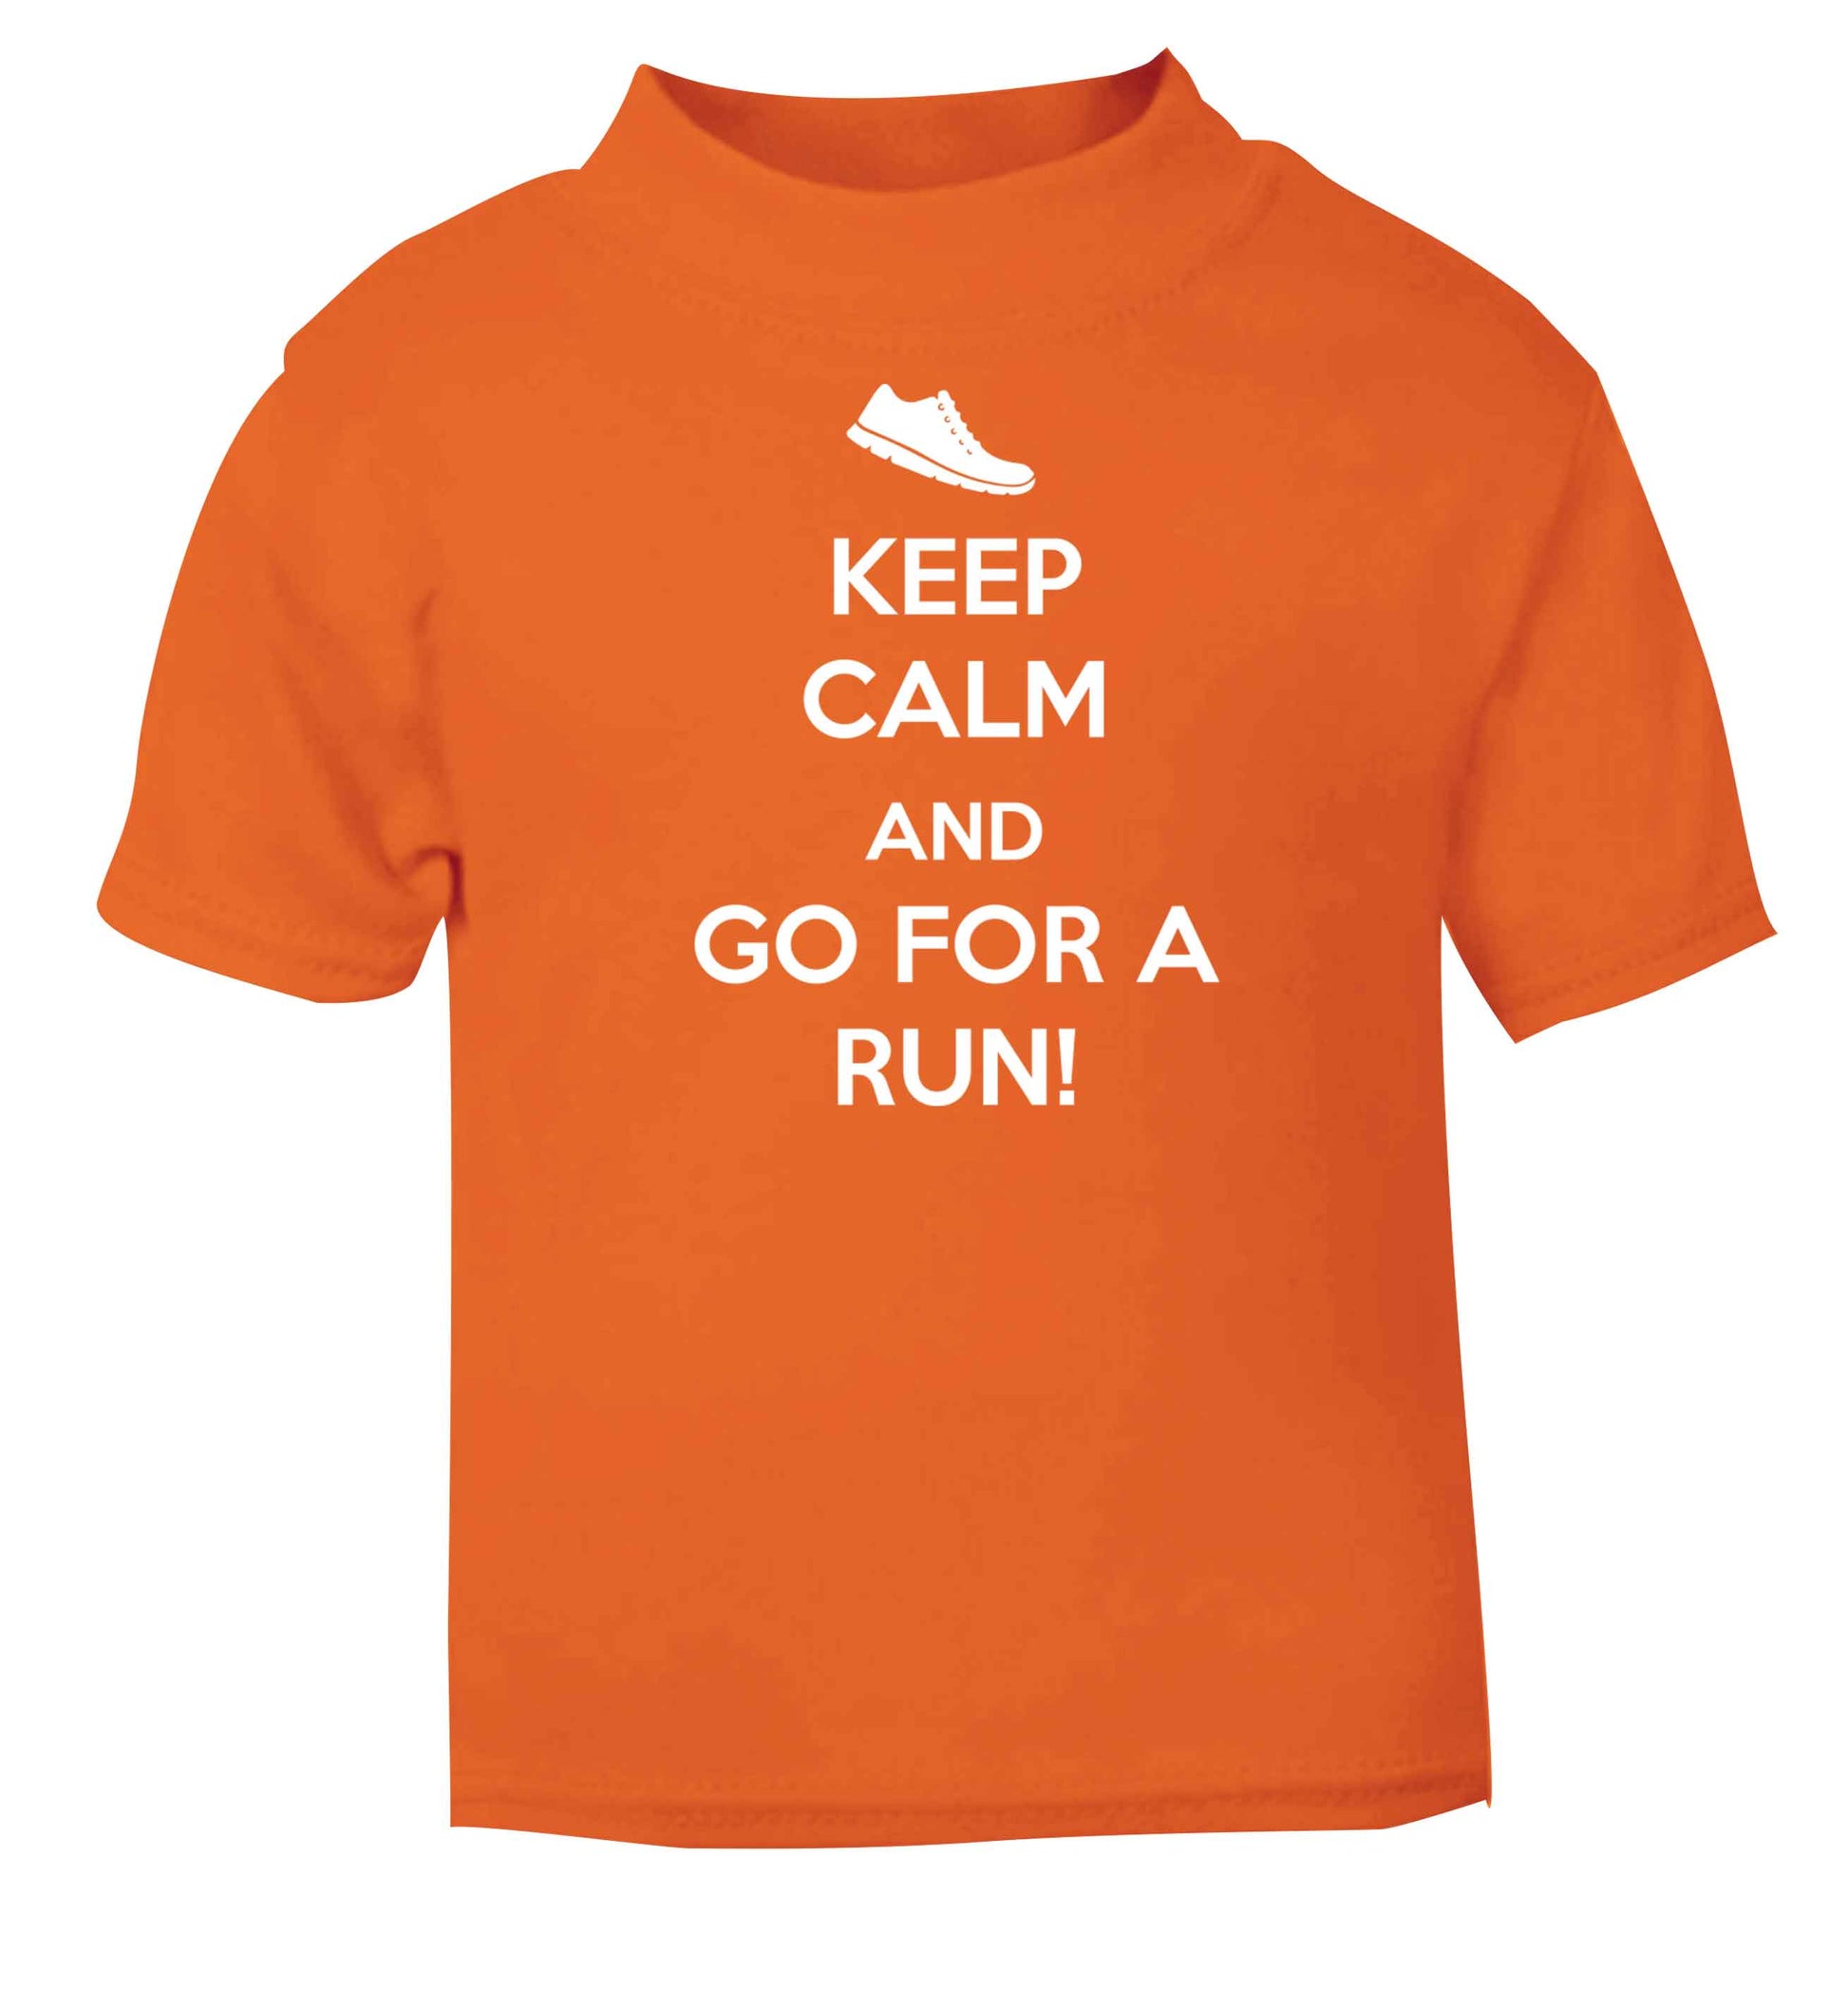 Keep calm and go for a run orange baby toddler Tshirt 2 Years